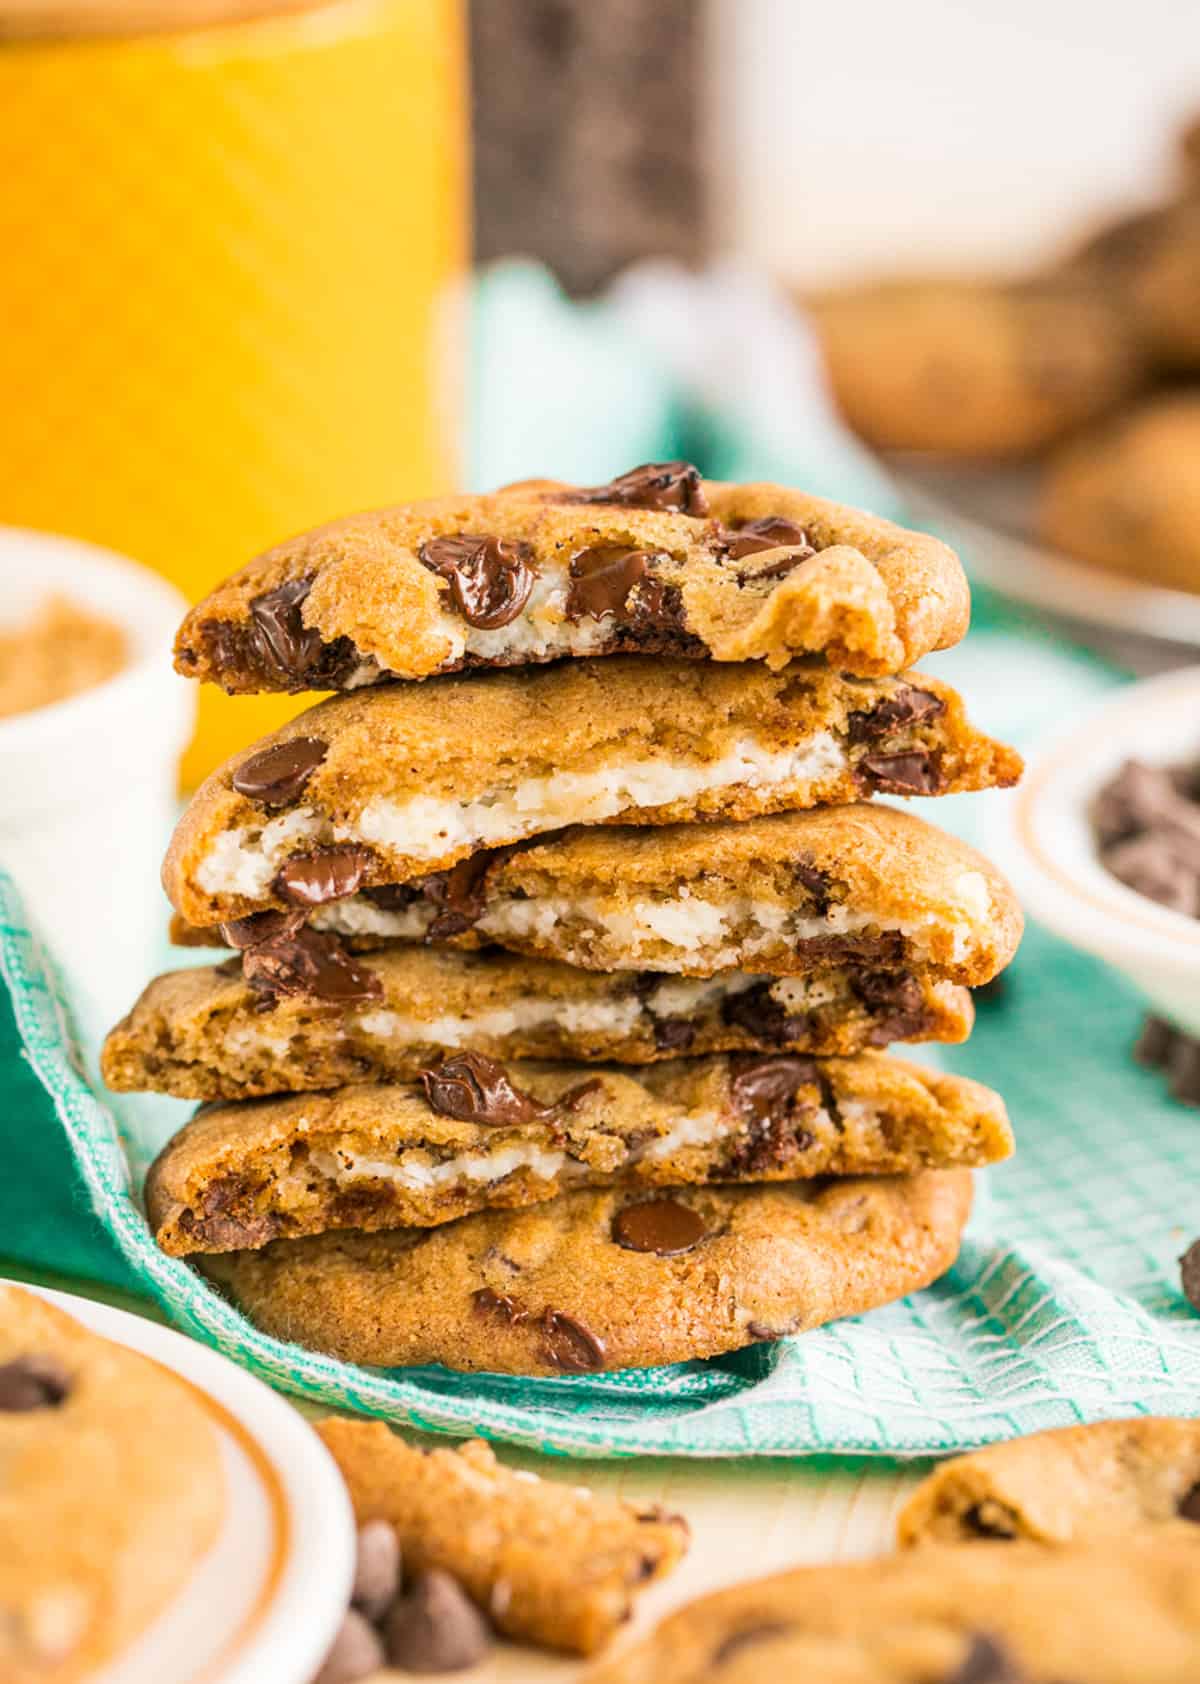 Stacked Cheesecake Stuffed Chocolate Chip Cookies on teal linen with whole cookies around it split in half showing cheesecake filling.